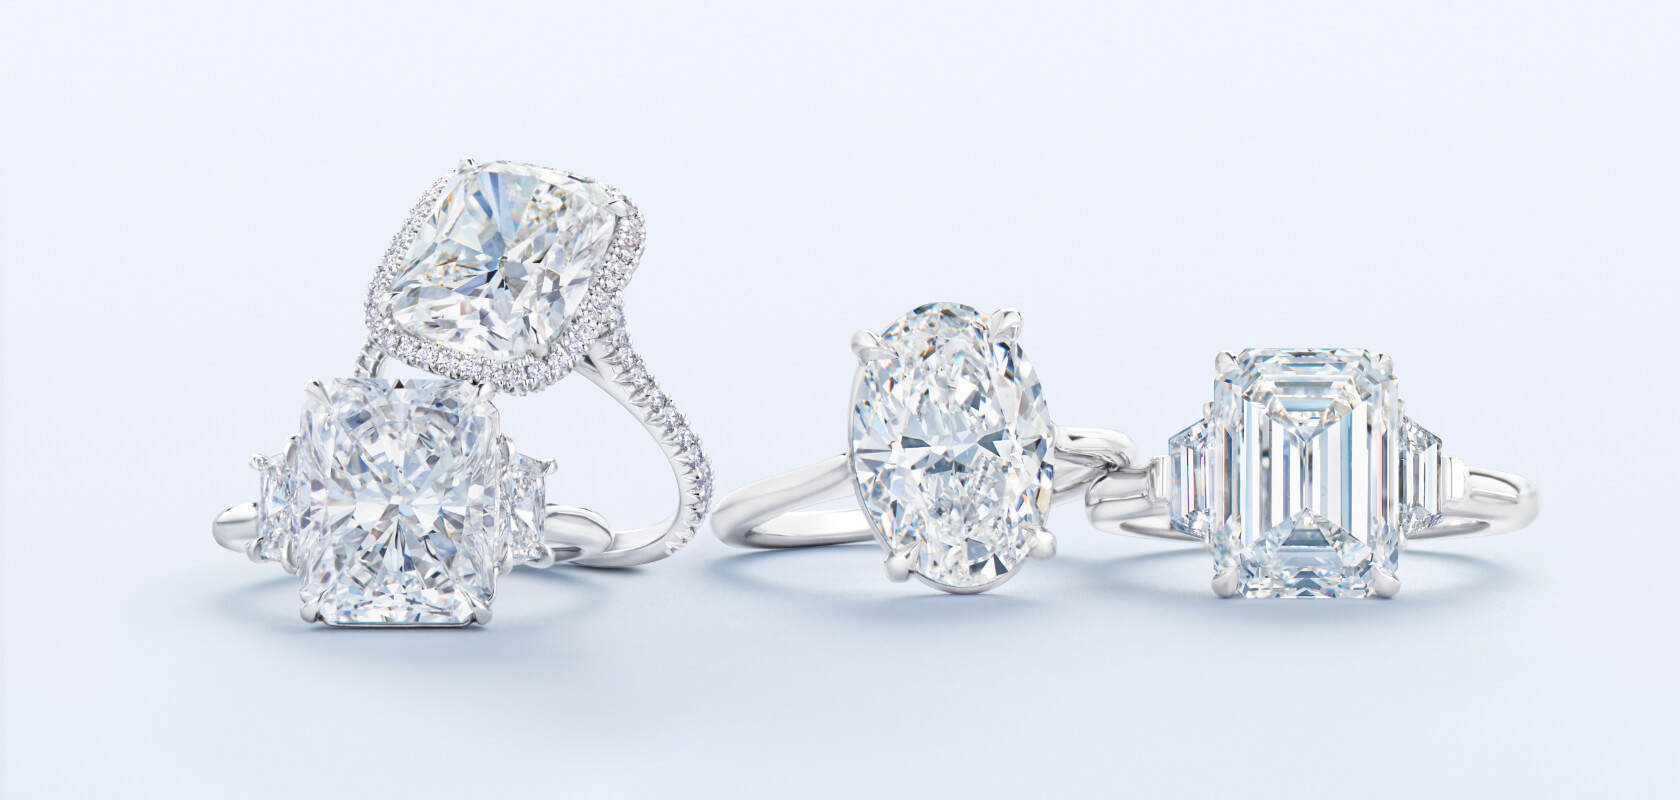 Most Popular Diamond Shapes For Engagement Rings